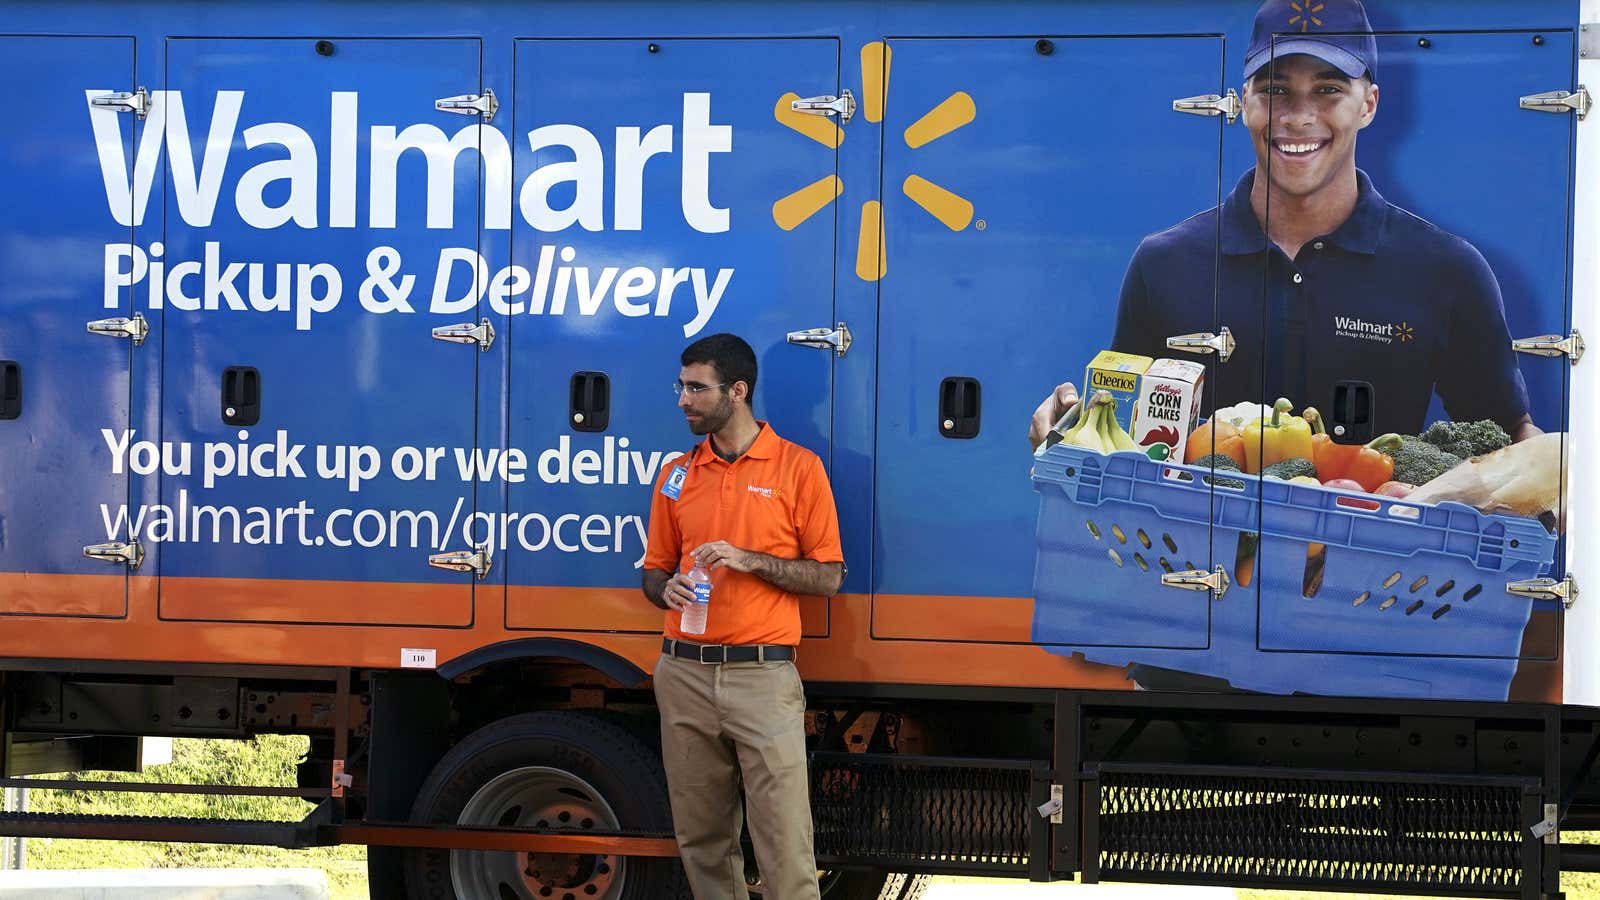 Wal-Mart’s efficiency means they can spend less on labor.